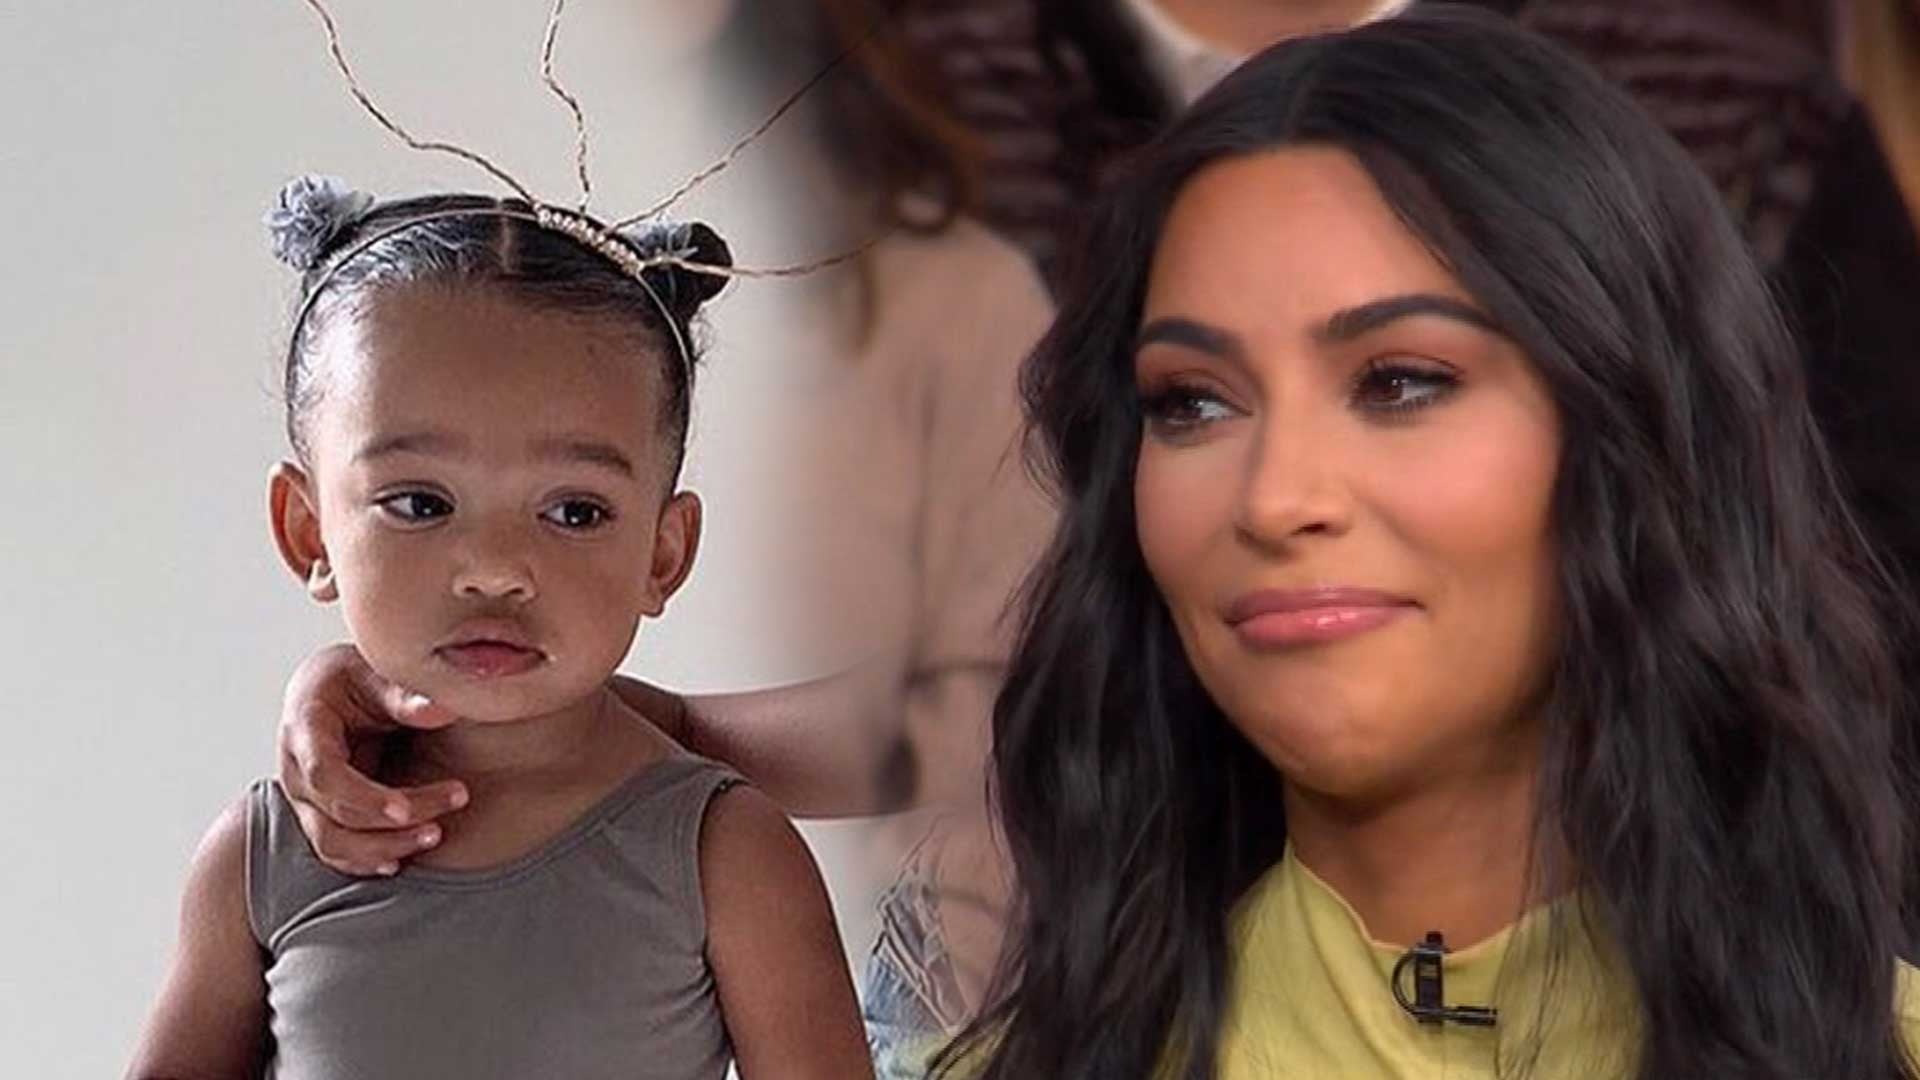 Kim Kardashian Reveals Daughter Chicago Fell Out Of Her High Chair And Cut Her Whole Face Entertainment Tonight